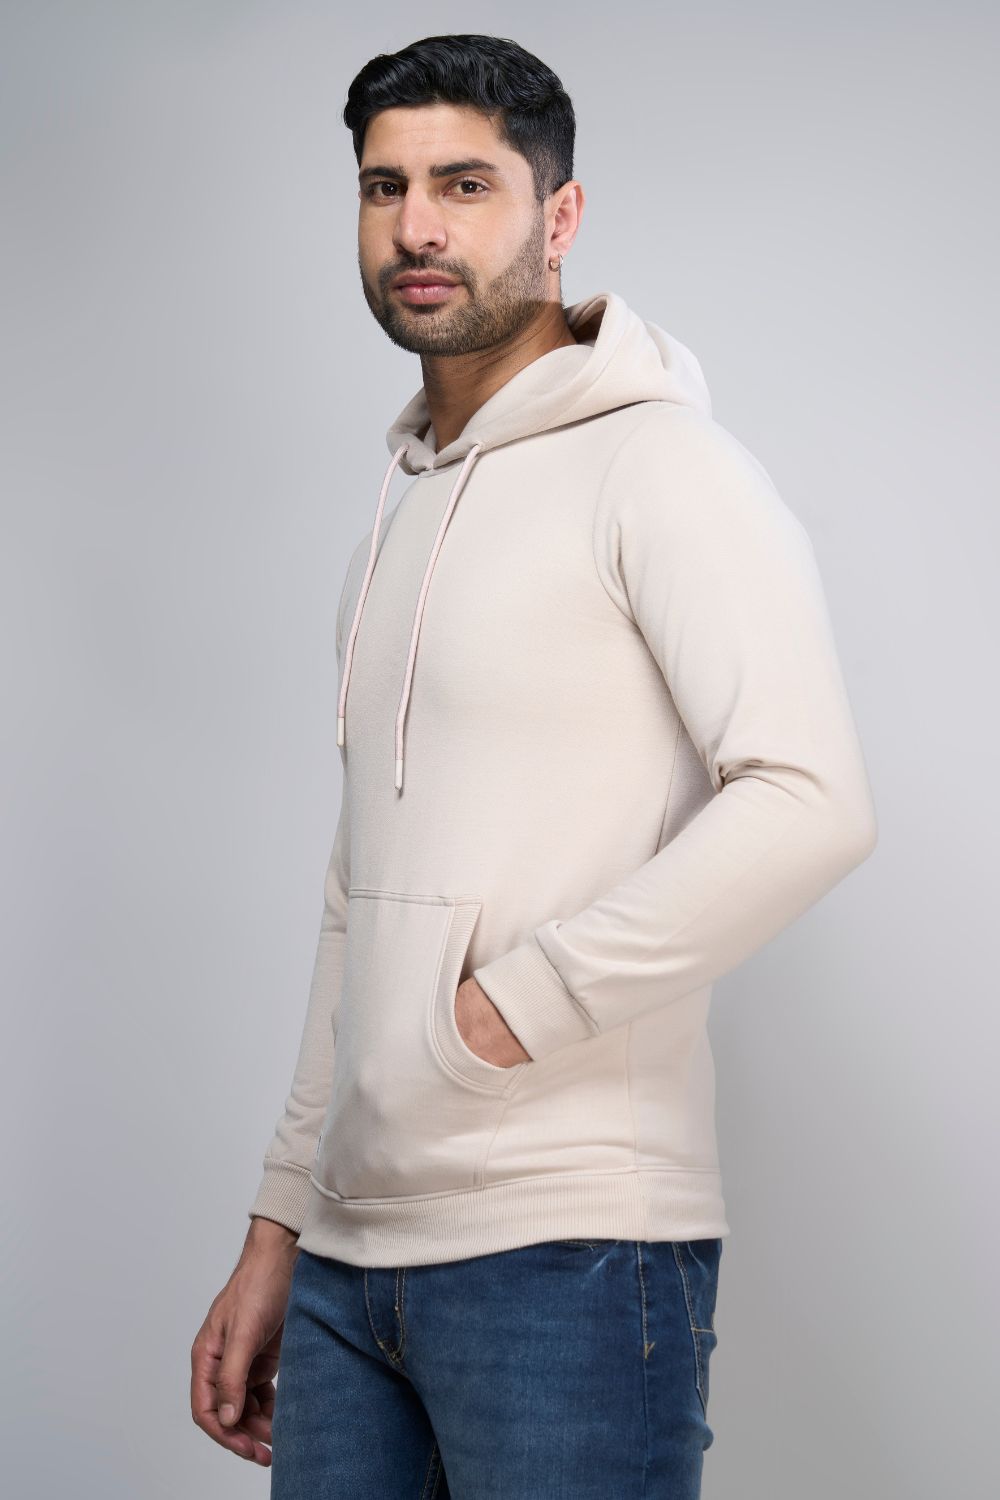 Soft Beige colored, hoodie for men with full sleeves and relaxed fit, pocket view.